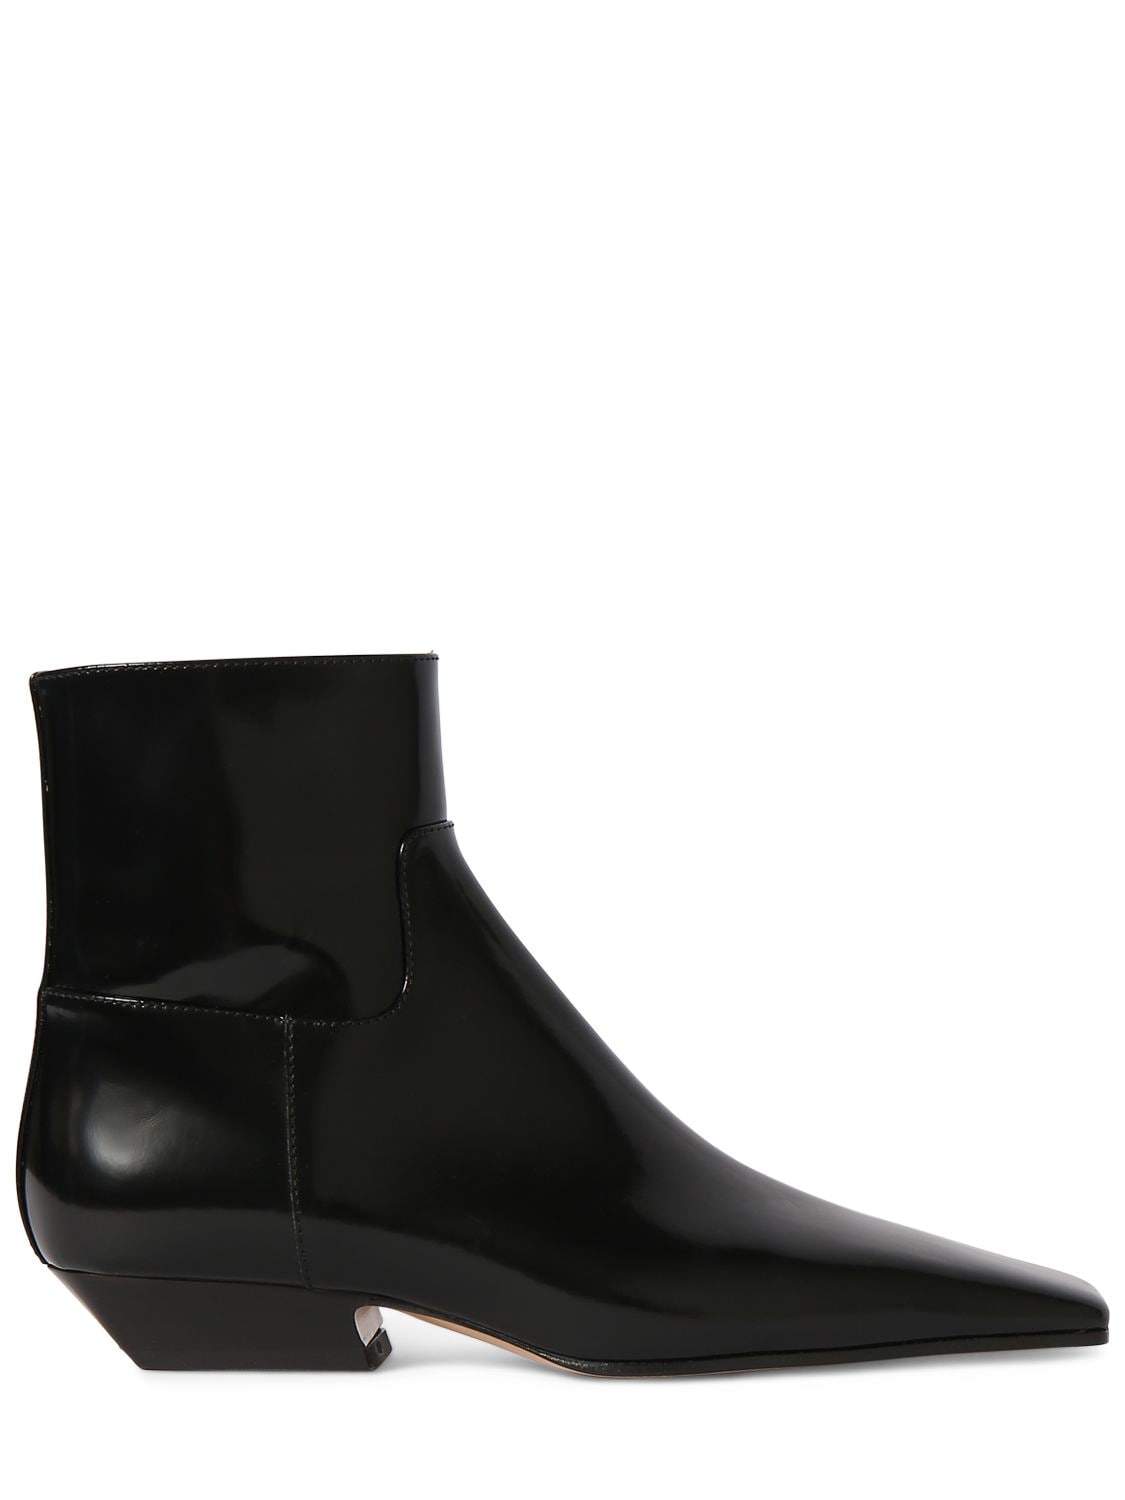 Khaite Marfa Classic Leather Ankle Boots In Black